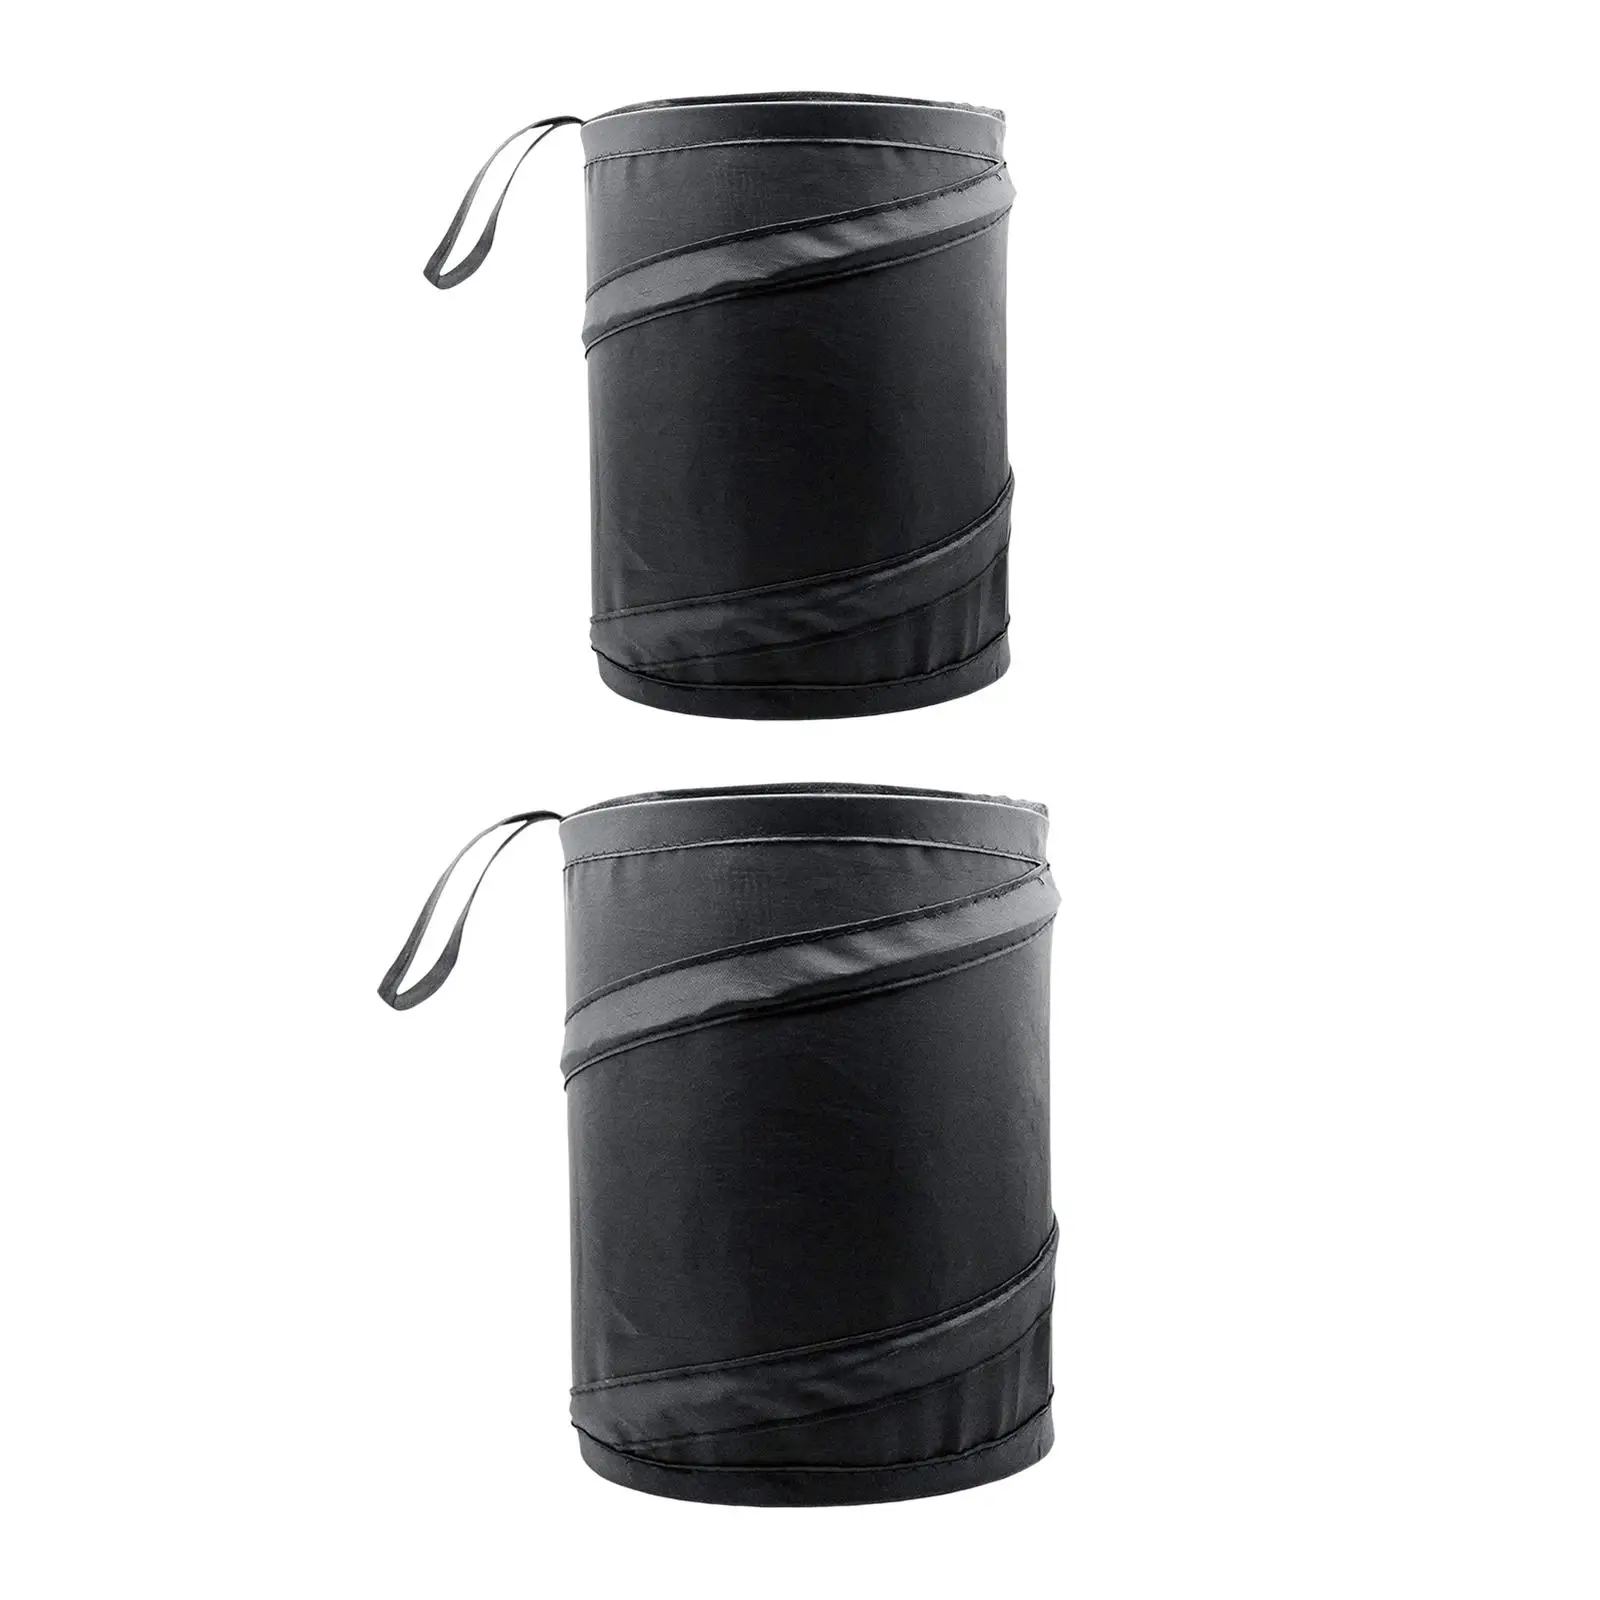 Car Trash Can with Hanging Lanyard for Bedroom Traveling Automotive